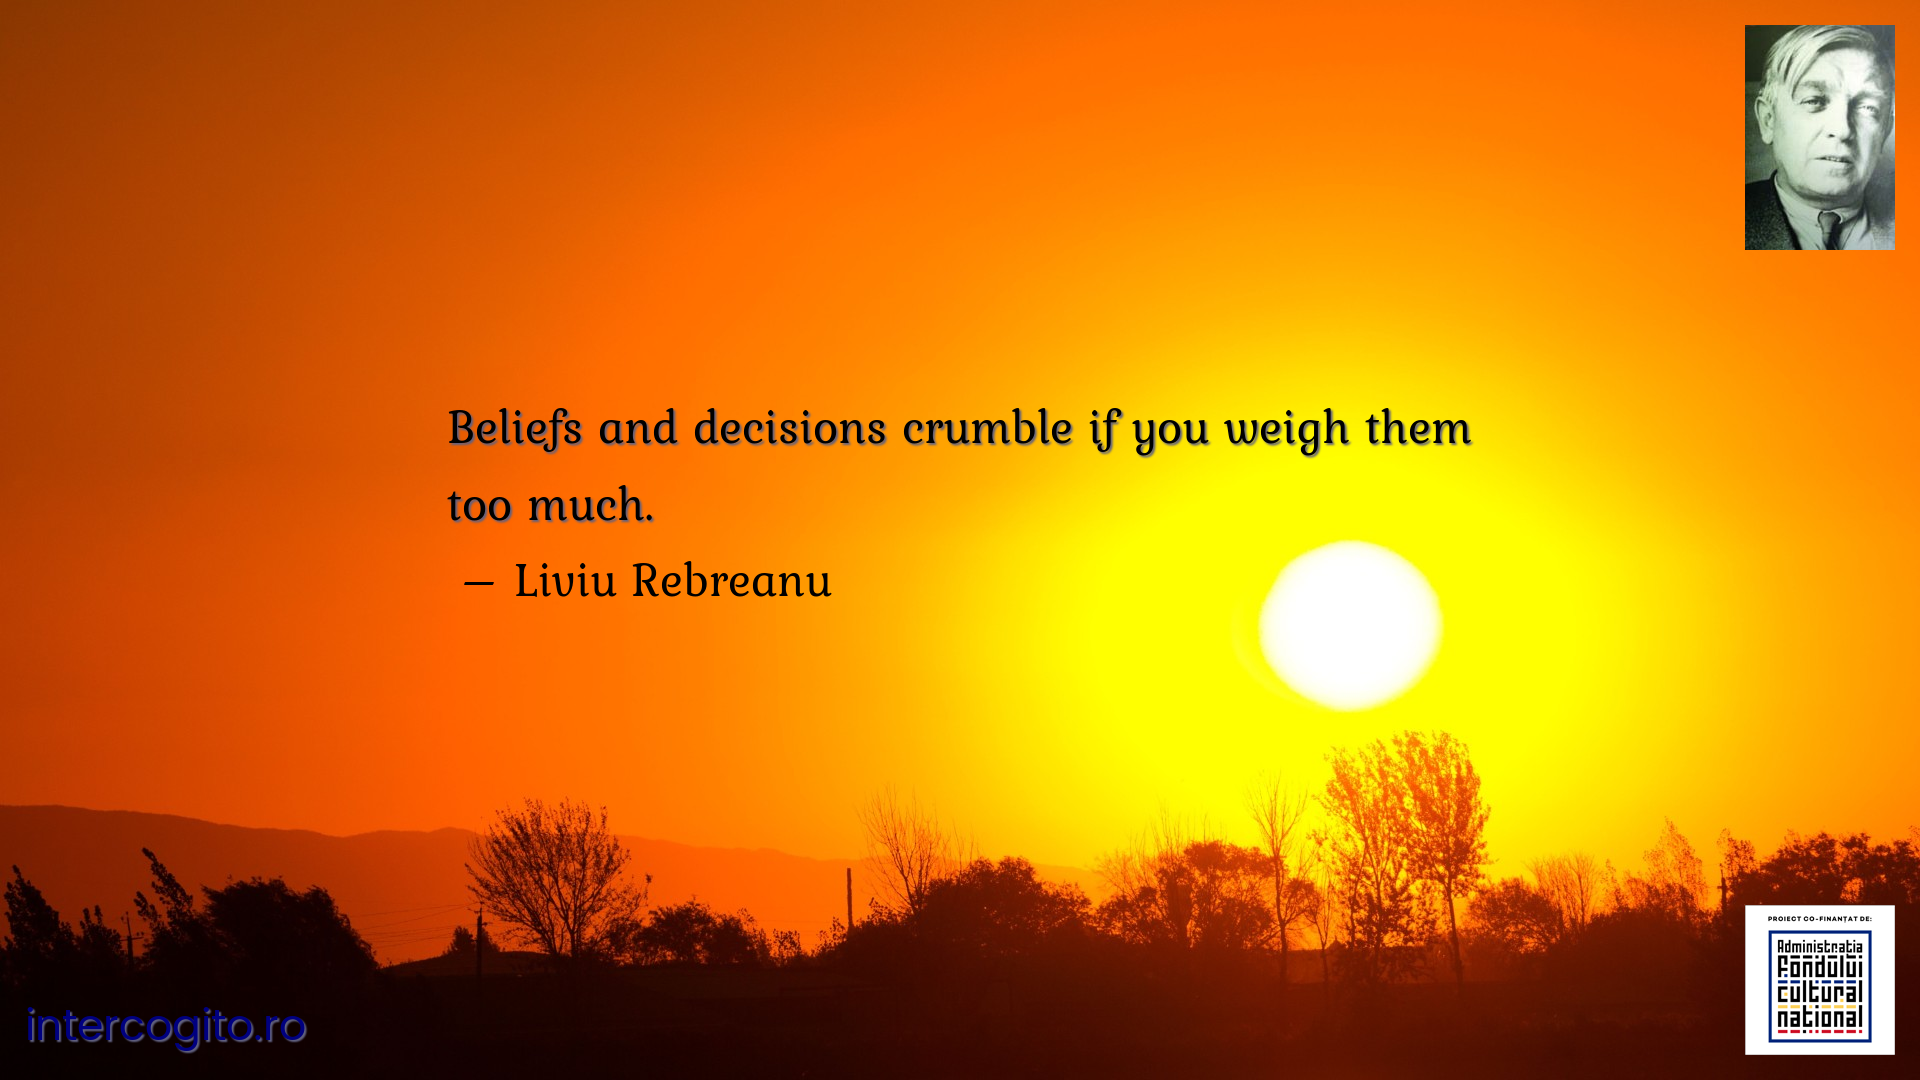 Beliefs and decisions crumble if you weigh them too much.